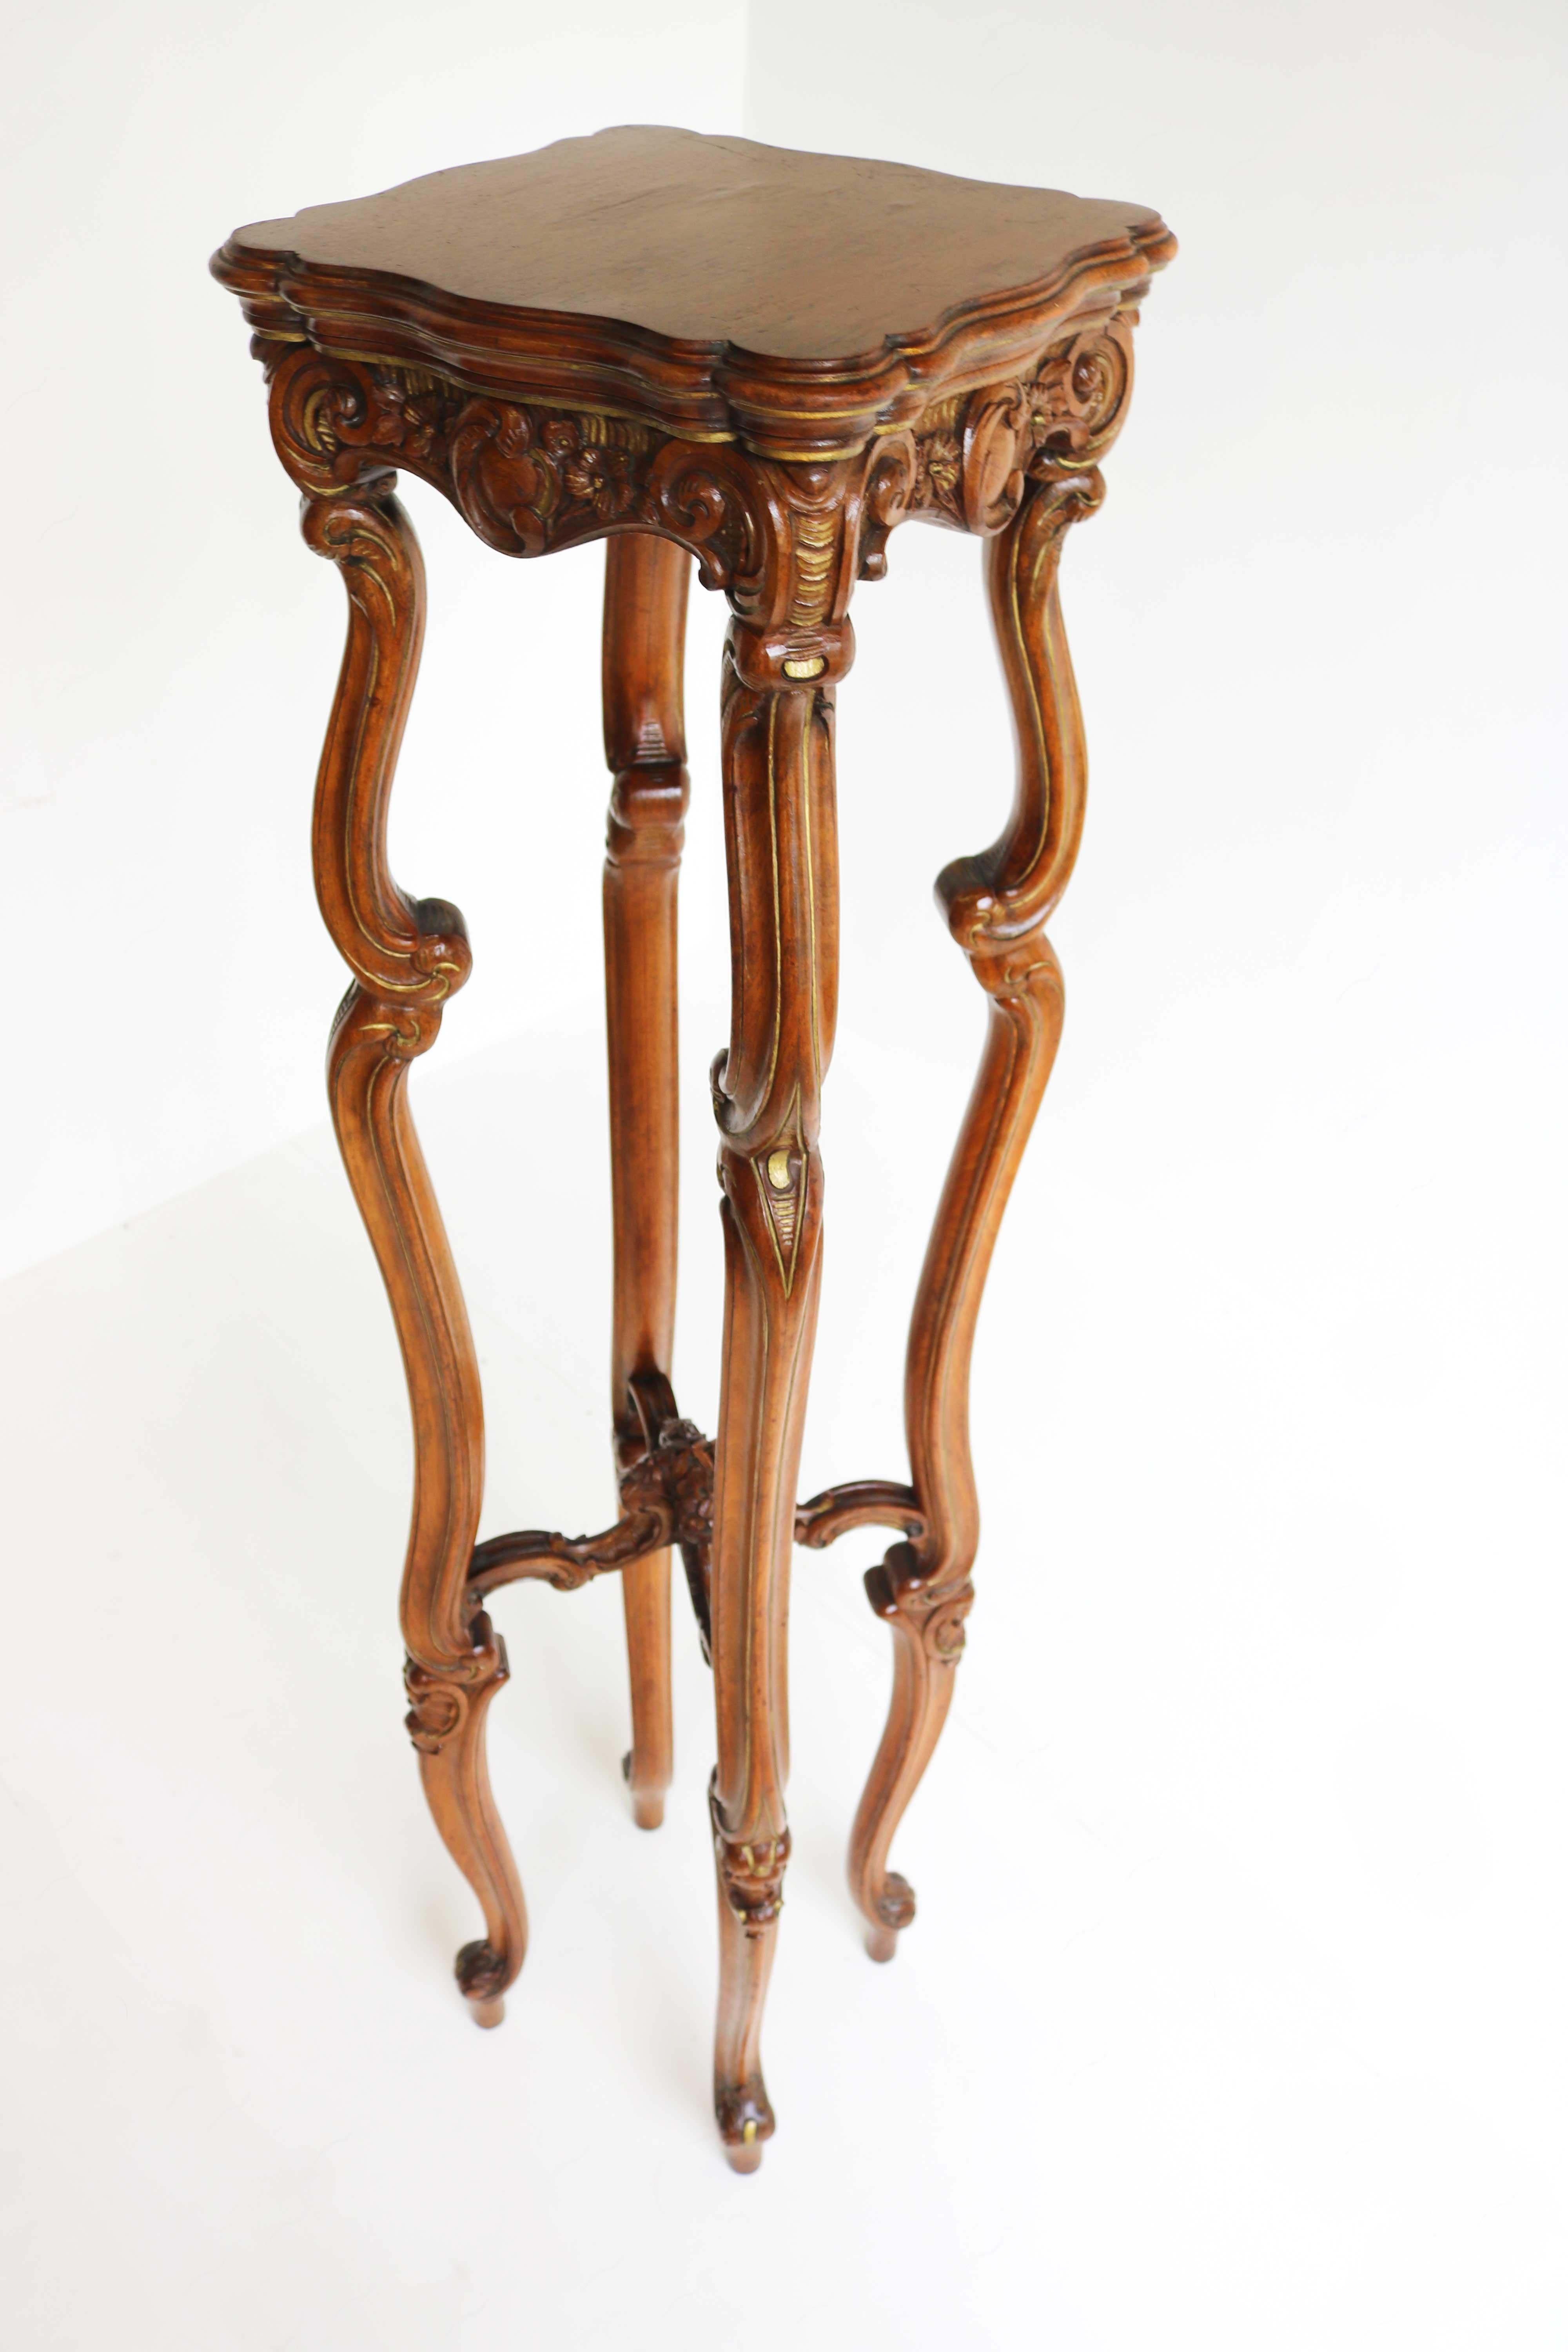 Antique French Louis XV Style Plant Stand, Carved Wood Table, Pedestal ca. 1900 For Sale 3